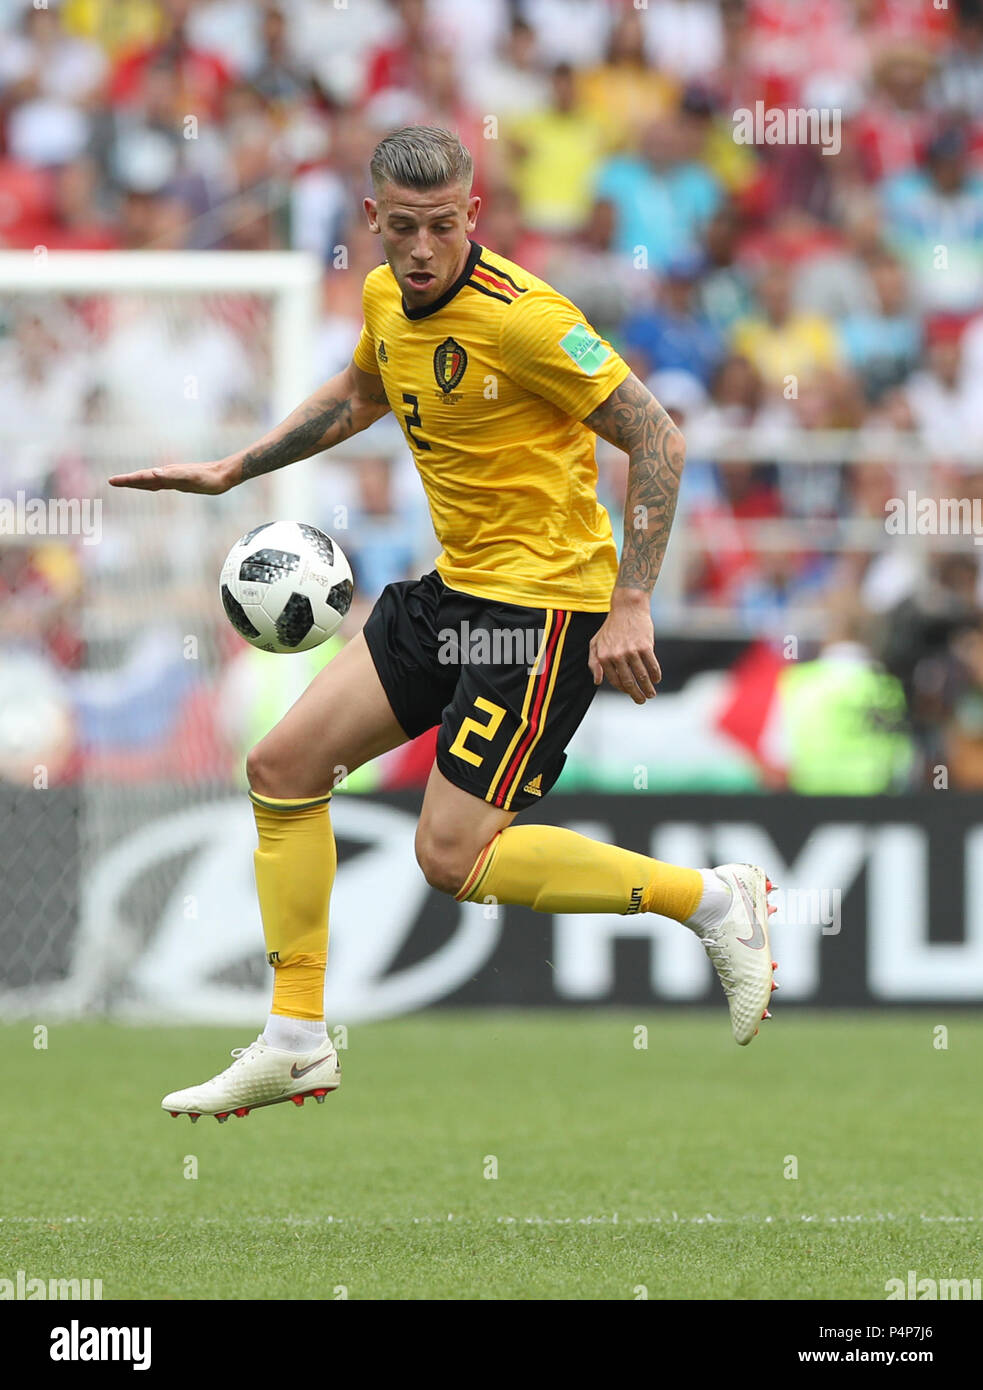 Moscow, Russia. 23rd June, 2018. Toby Alderweireld of Belgium controls the ball during the 2018 FIFA World Cup Group G match between Belgium and Tunisia in Moscow, Russia, June 23, 2018. Credit: Xu Zijian/Xinhua/Alamy Live News Stock Photo